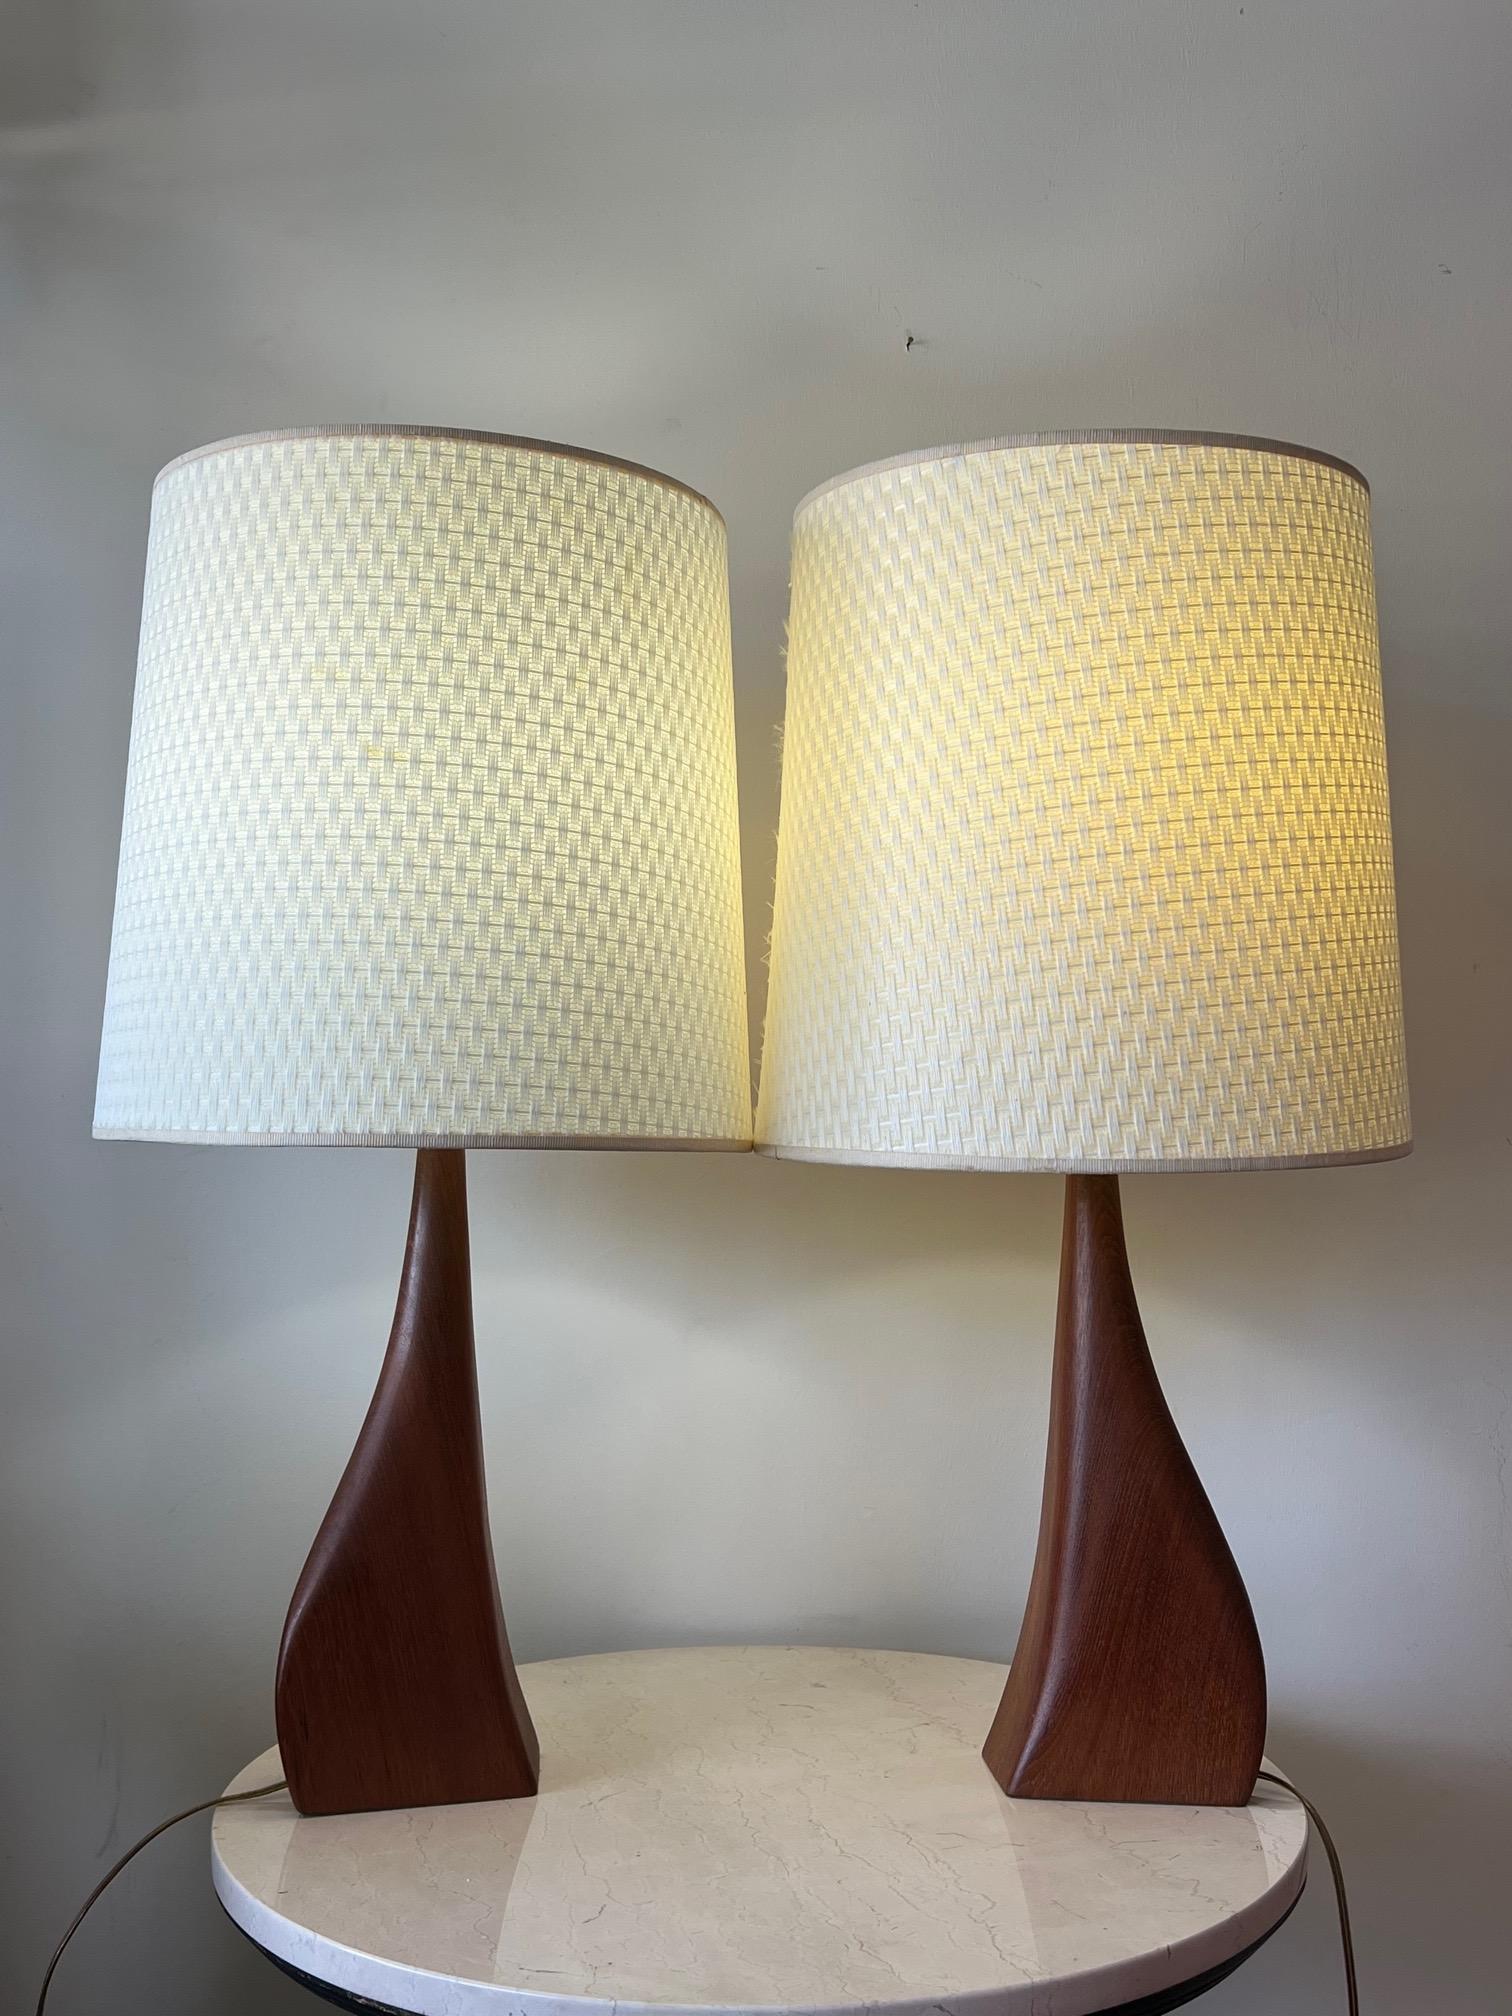 A pair of unusual, sculptural table lamps in teak designed by Johannes Aasbjerg and produced in Denmark for a short time in the early 1960s. The teak base is 16